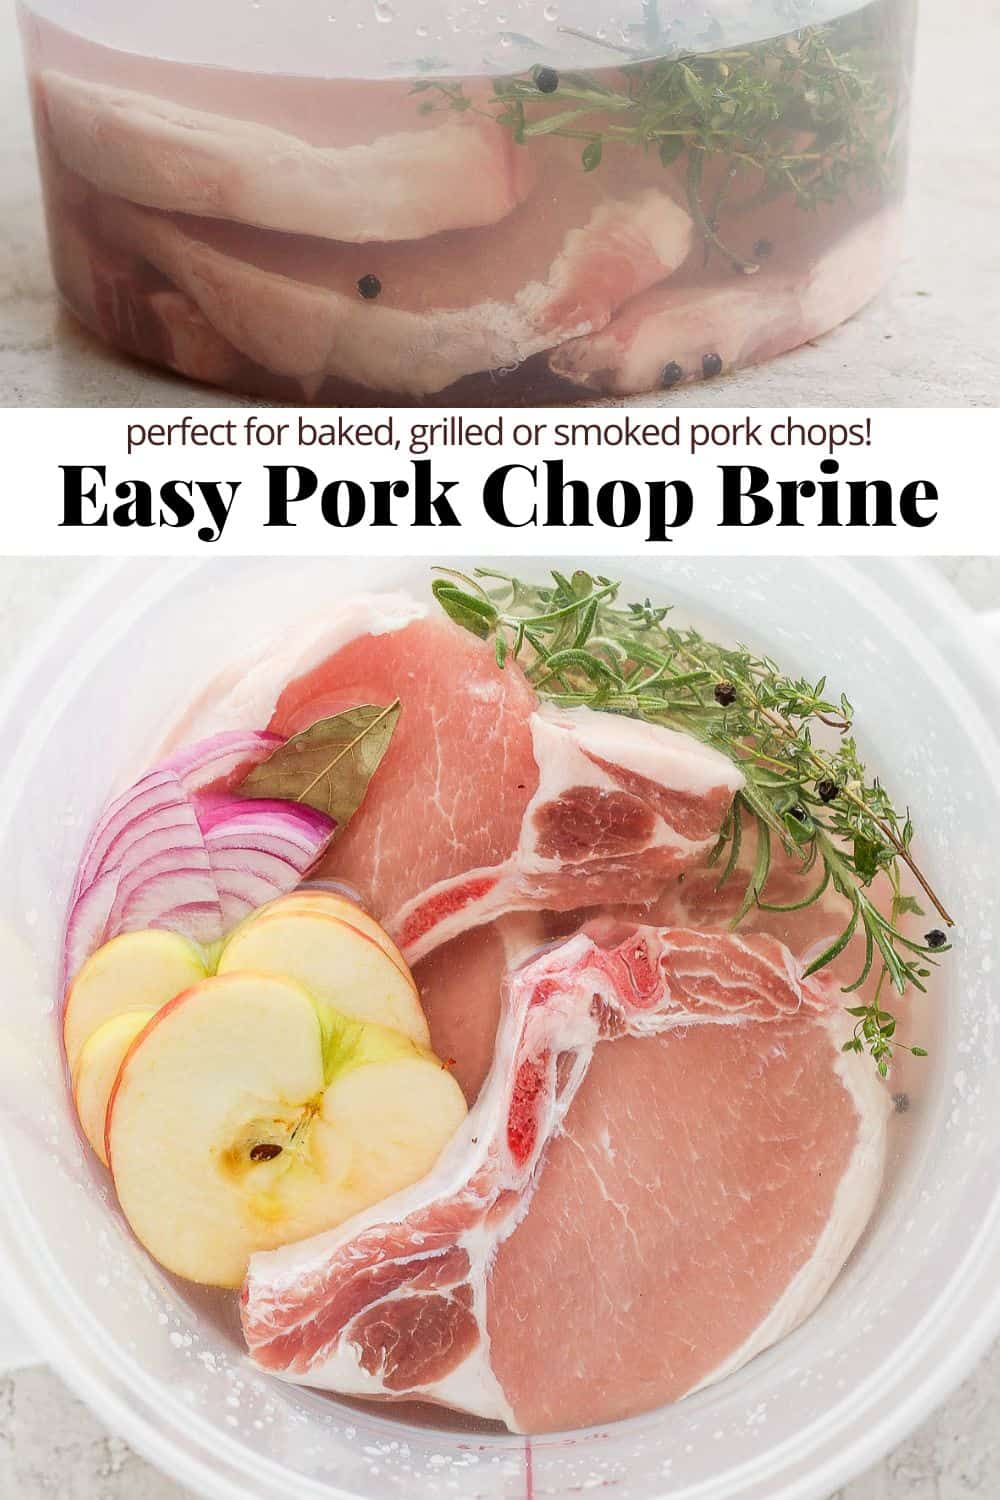 Pinterest image of all the brine ingredients and pork chops in a food safe container, the pinterest title of "easy pork chop brine", followed by a top down image of the pork chops, herbs, apple slices, and onion in the same food safe container. 